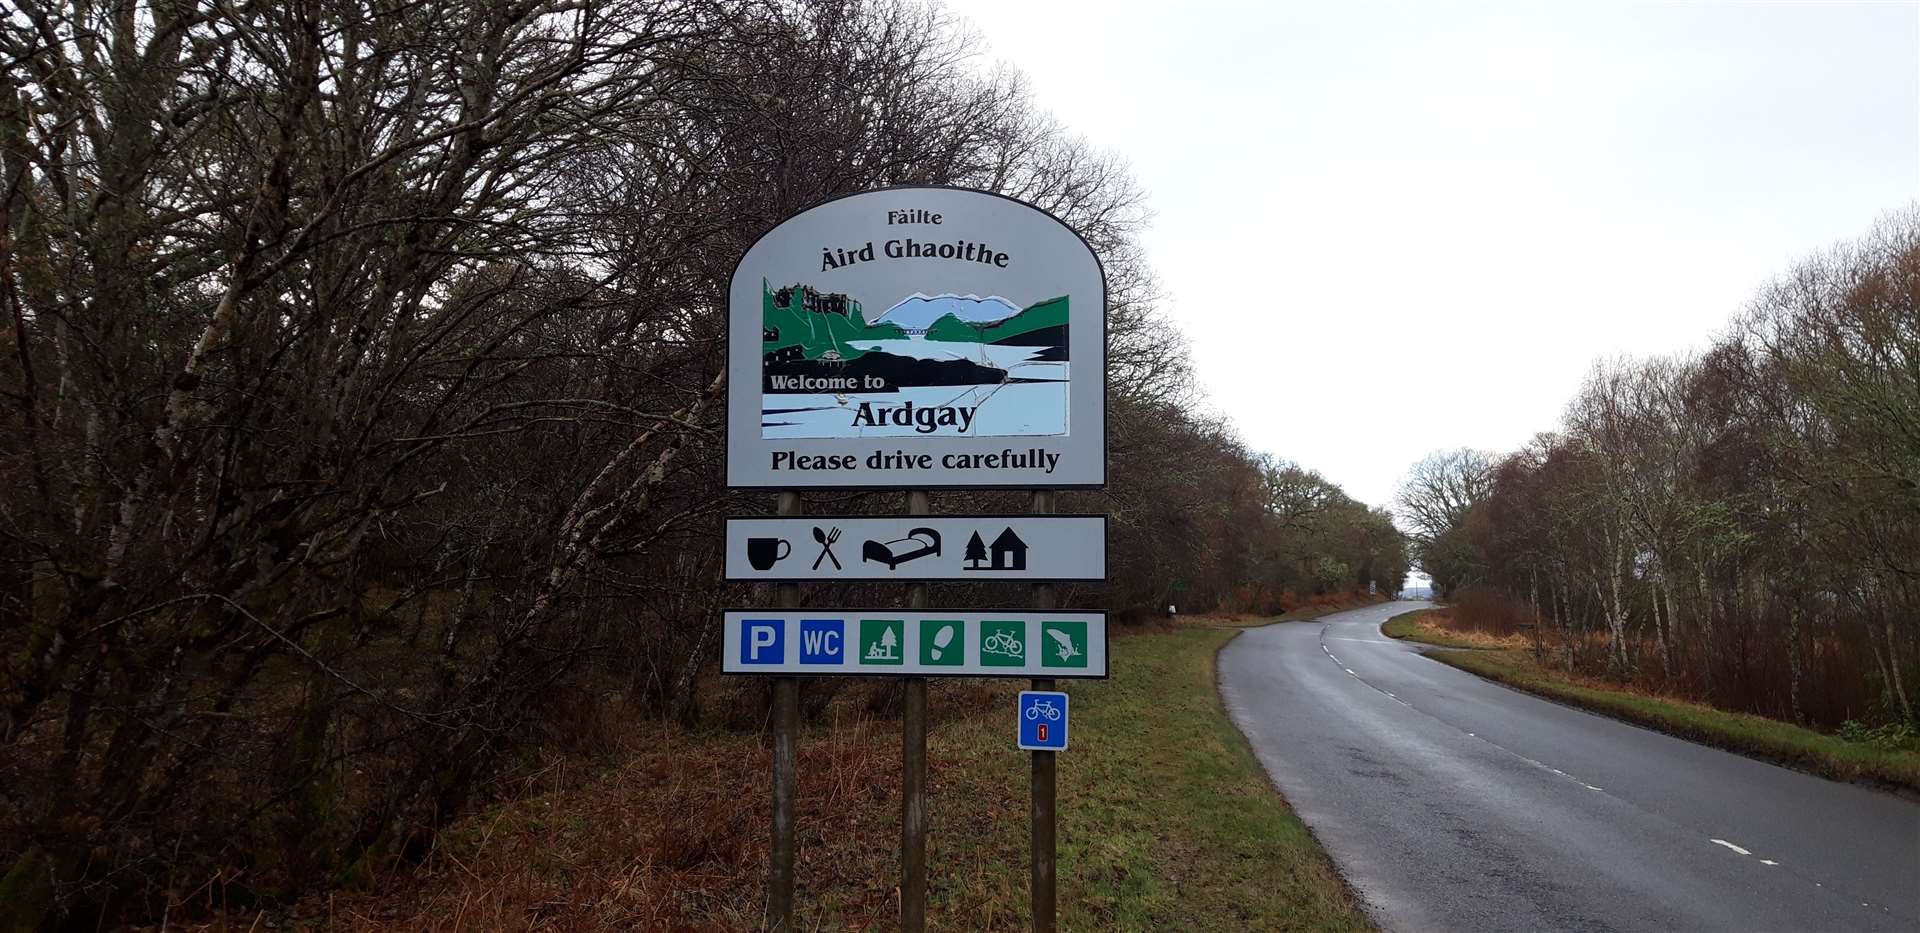 Ardgay residents believe the area has received considerable negative attention recently and the community deserves to be heard.